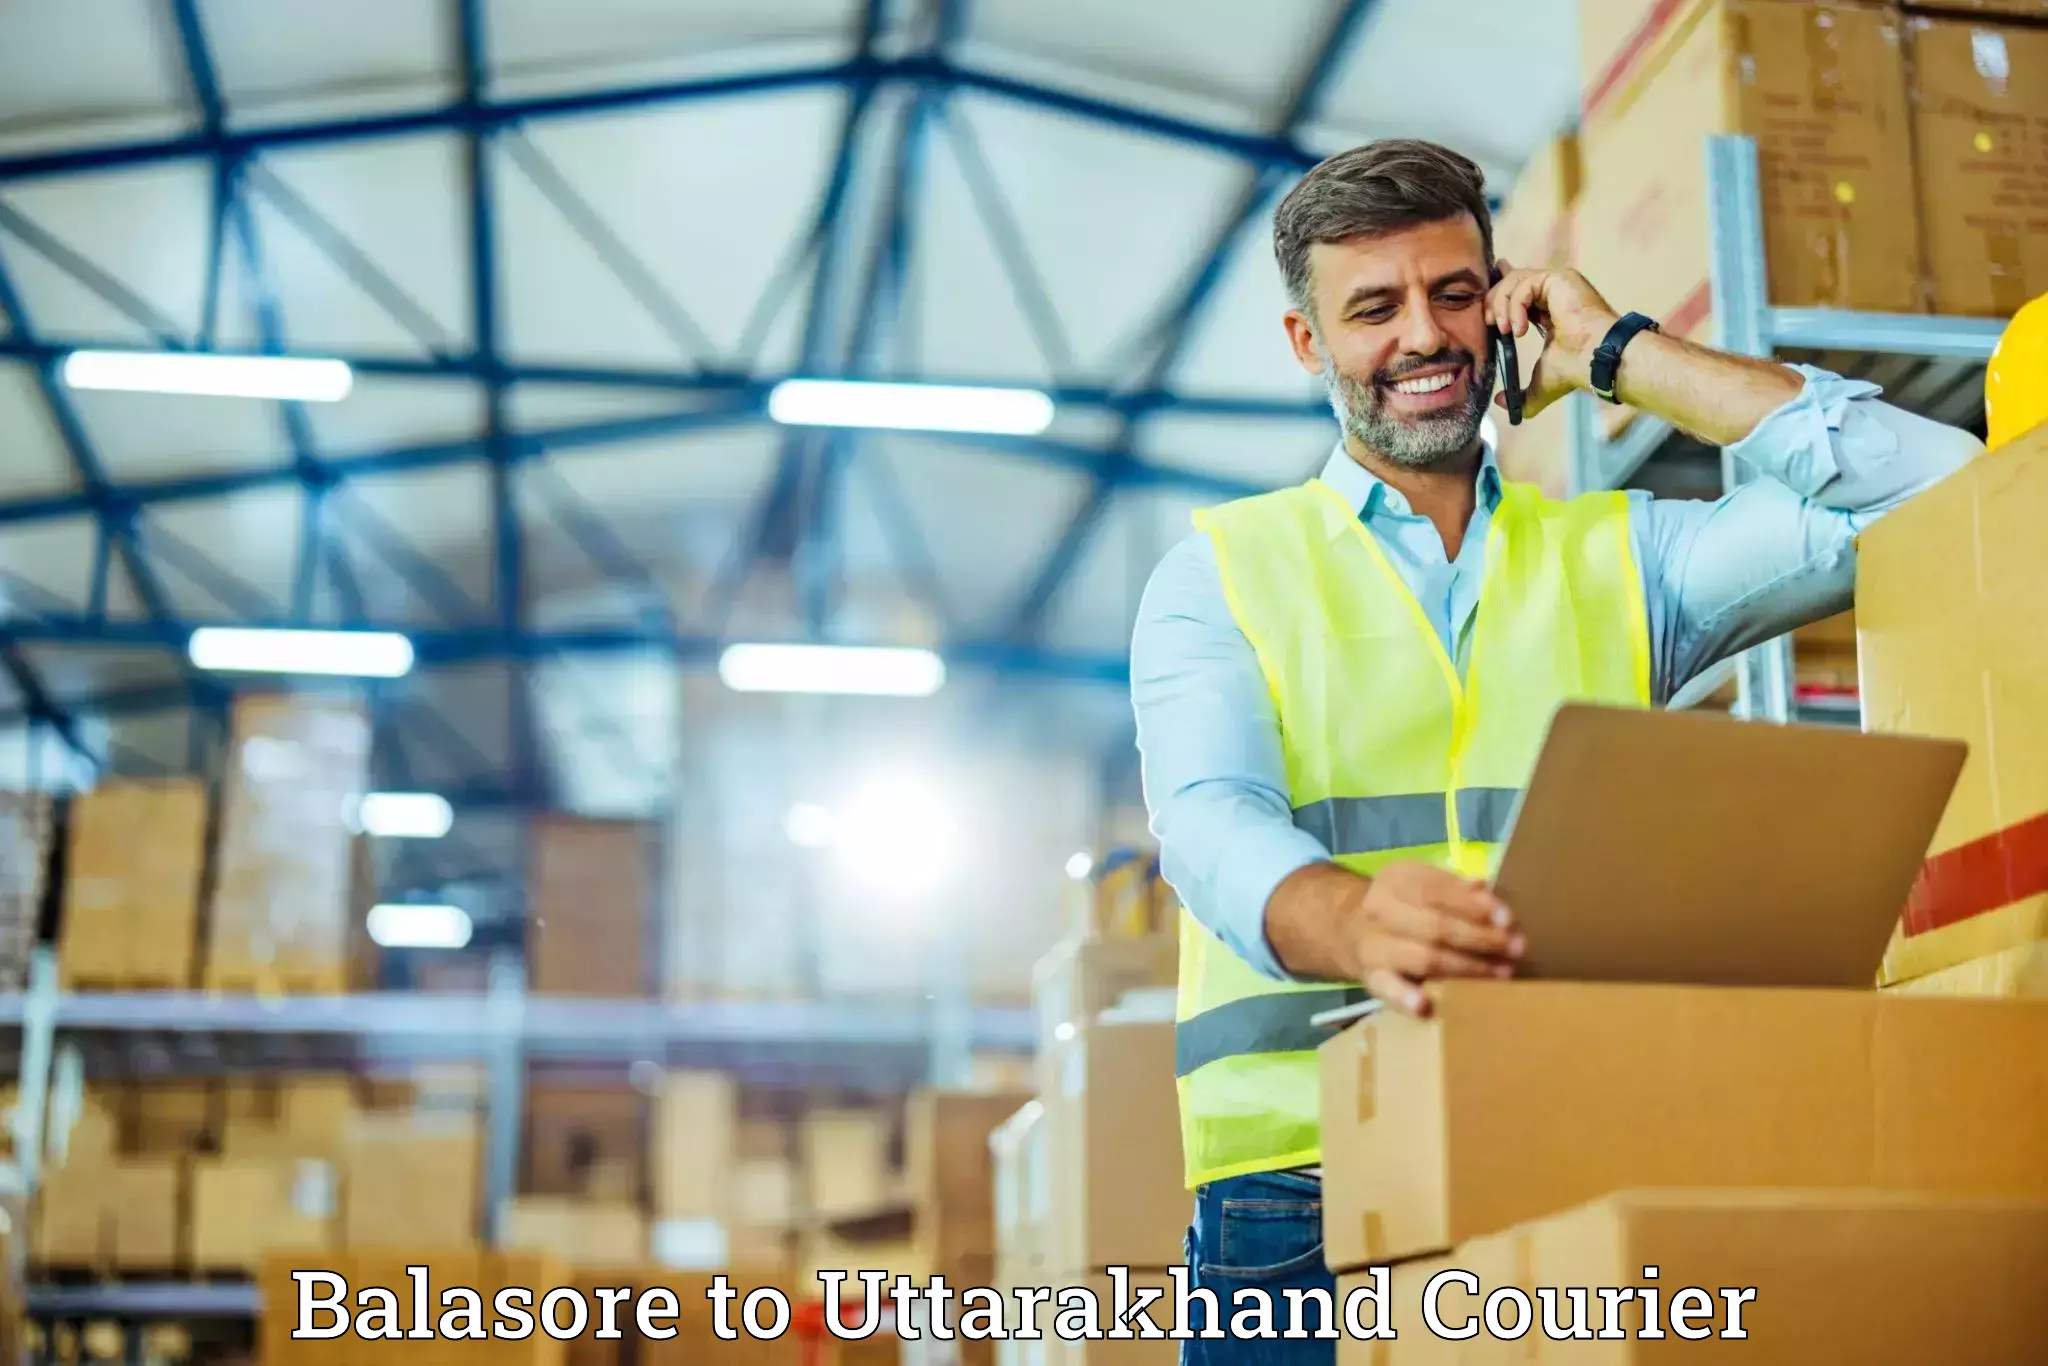 Furniture moving specialists Balasore to IIT Roorkee